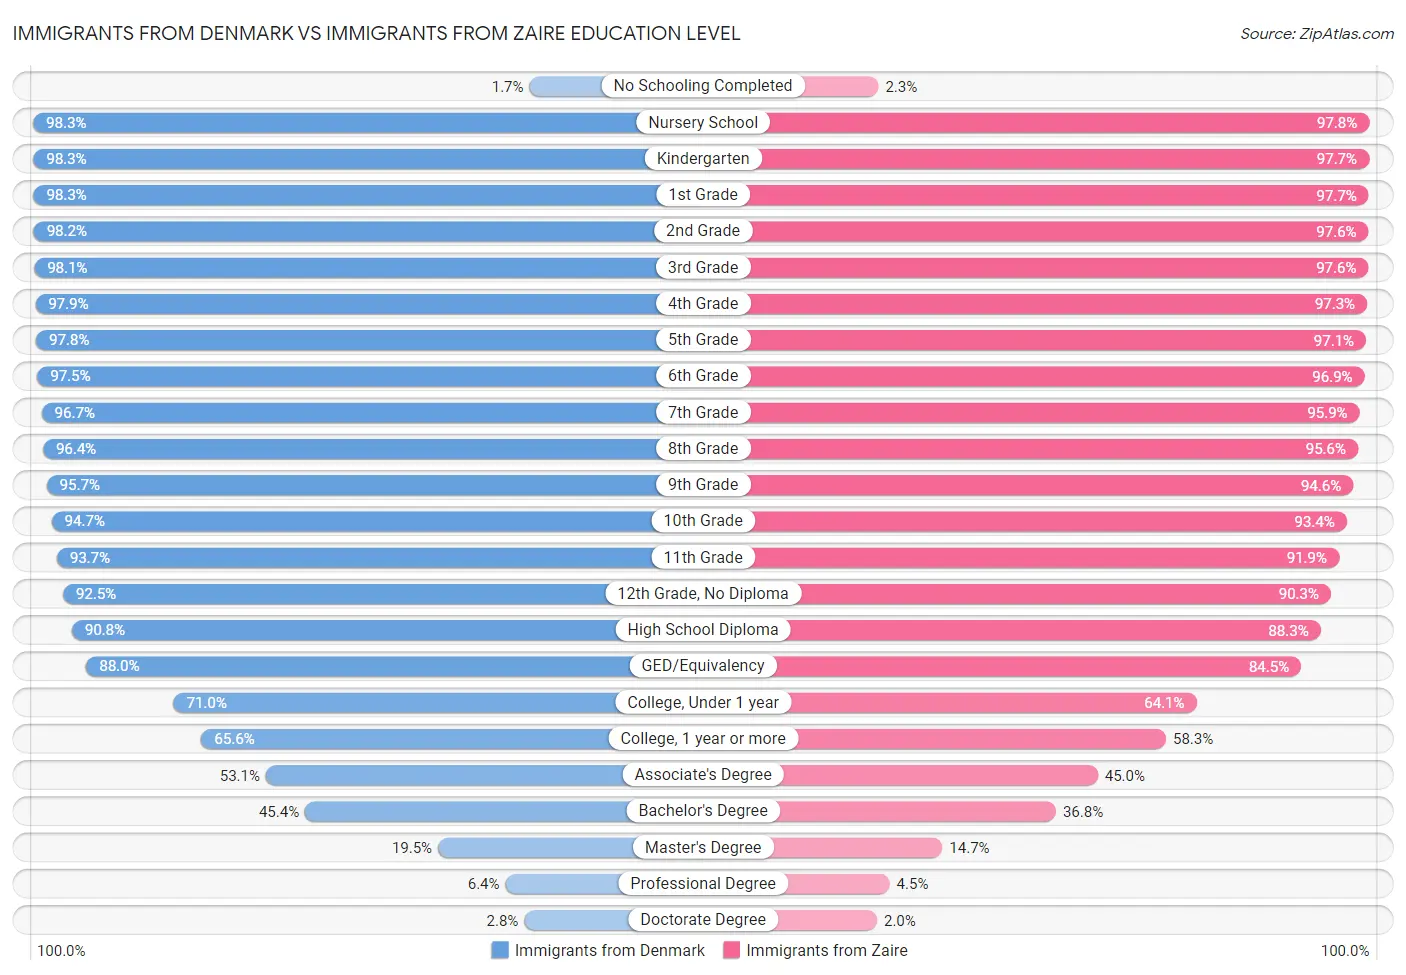 Immigrants from Denmark vs Immigrants from Zaire Education Level